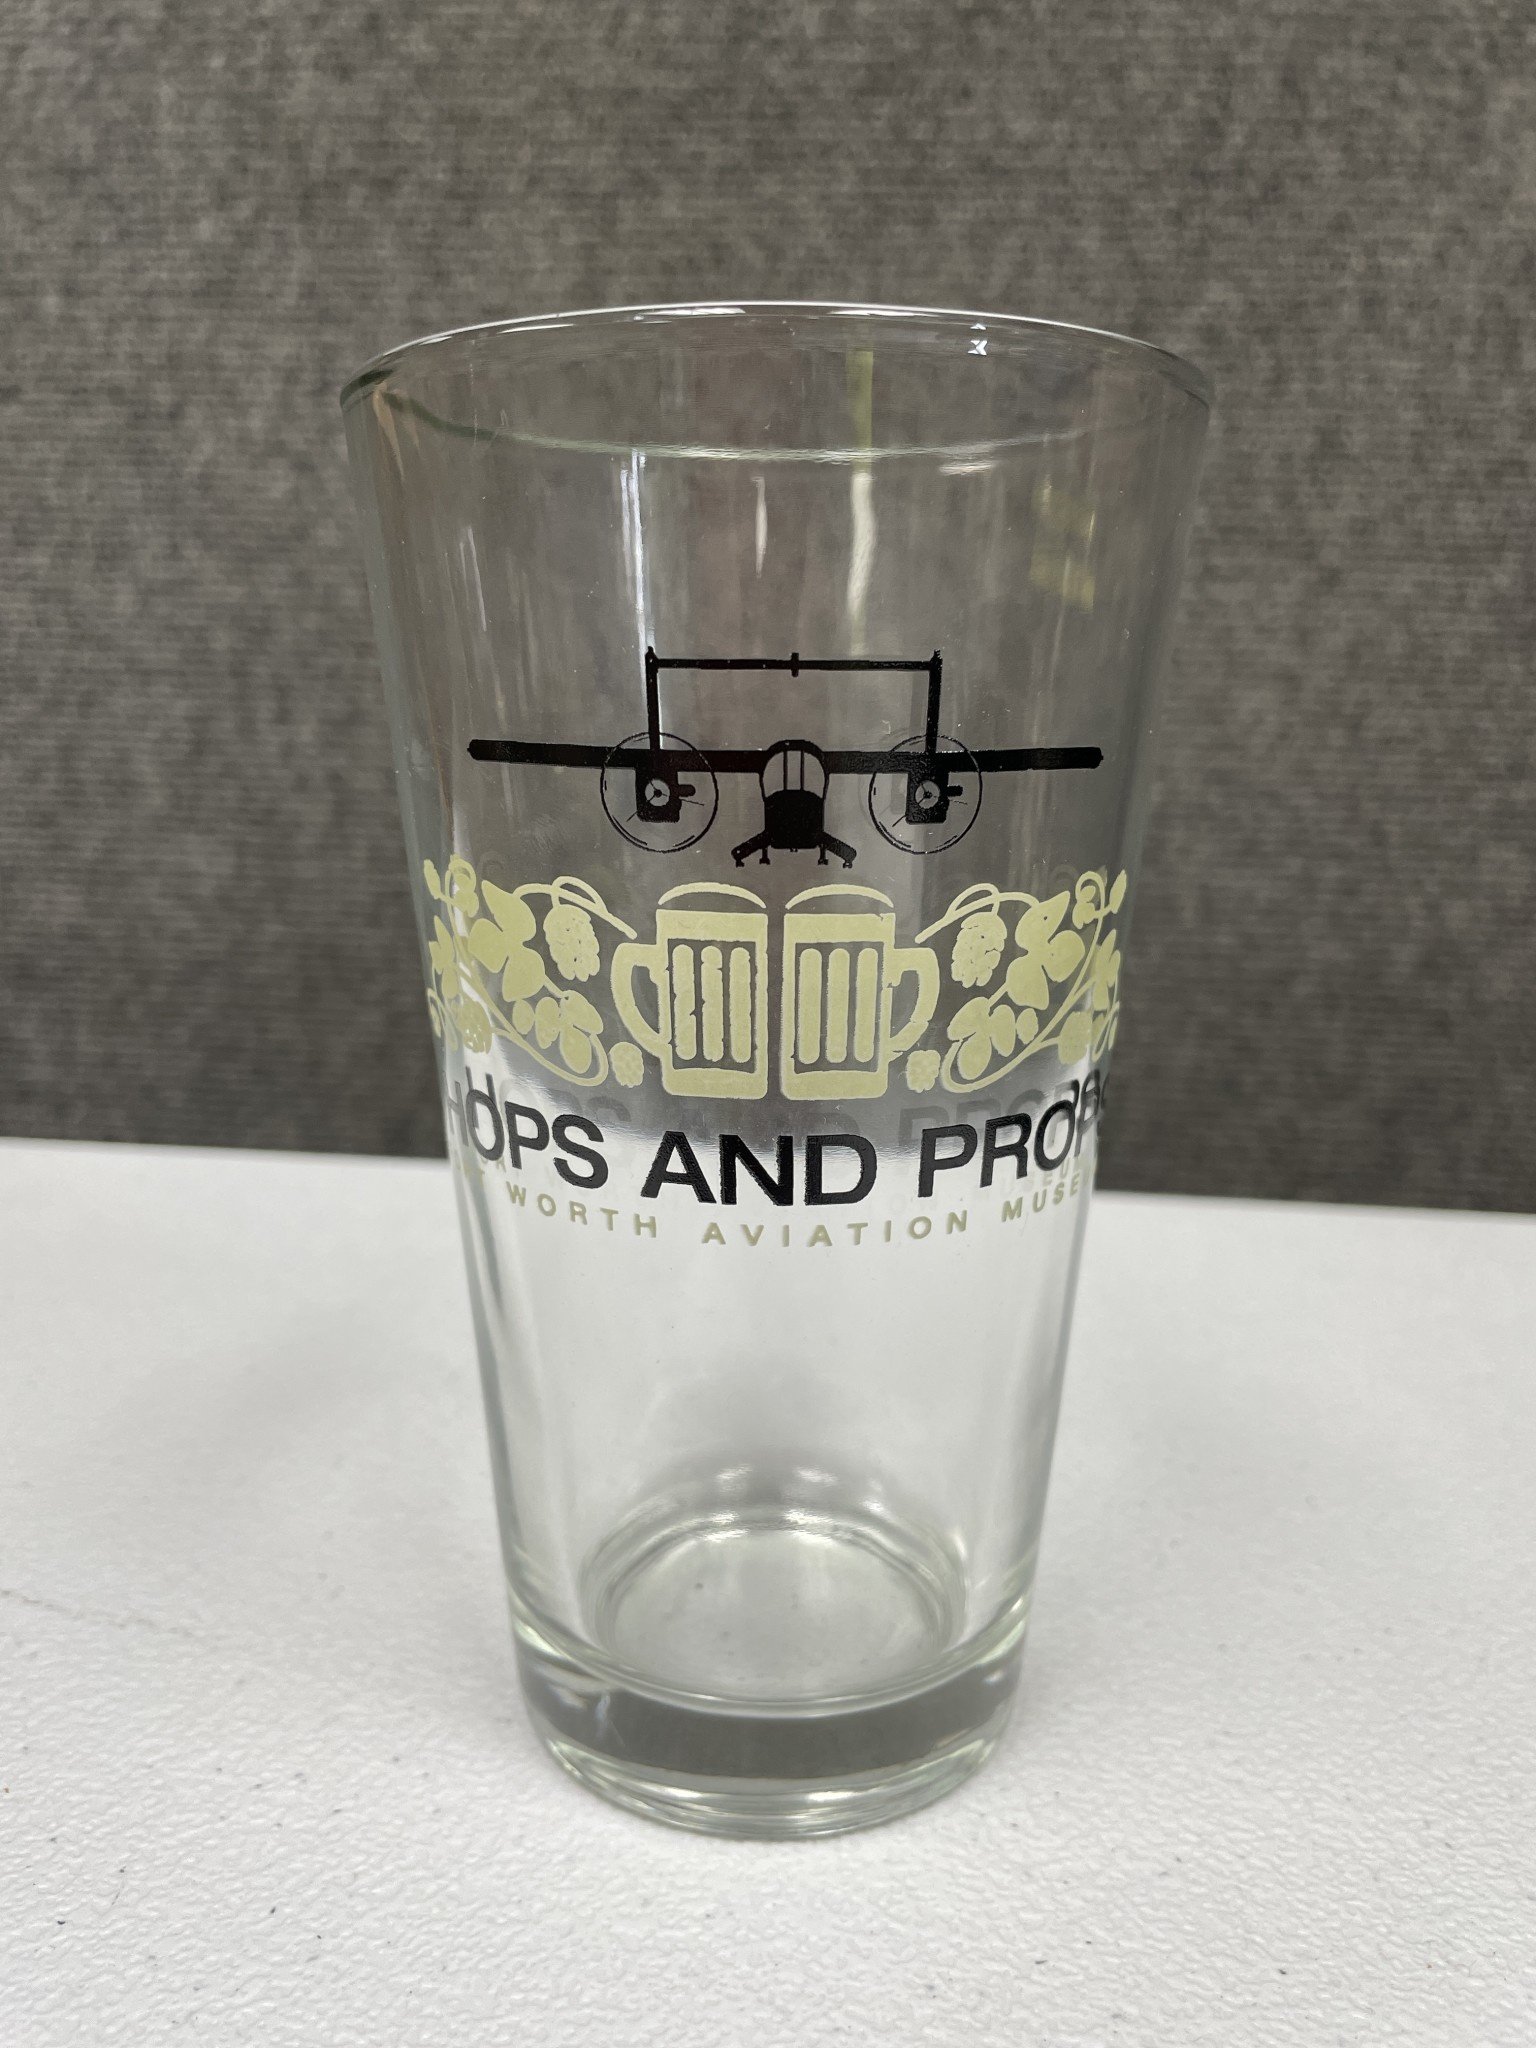 Hops and Props Pint Beer Glasses - Fort Worth Aviation Museum